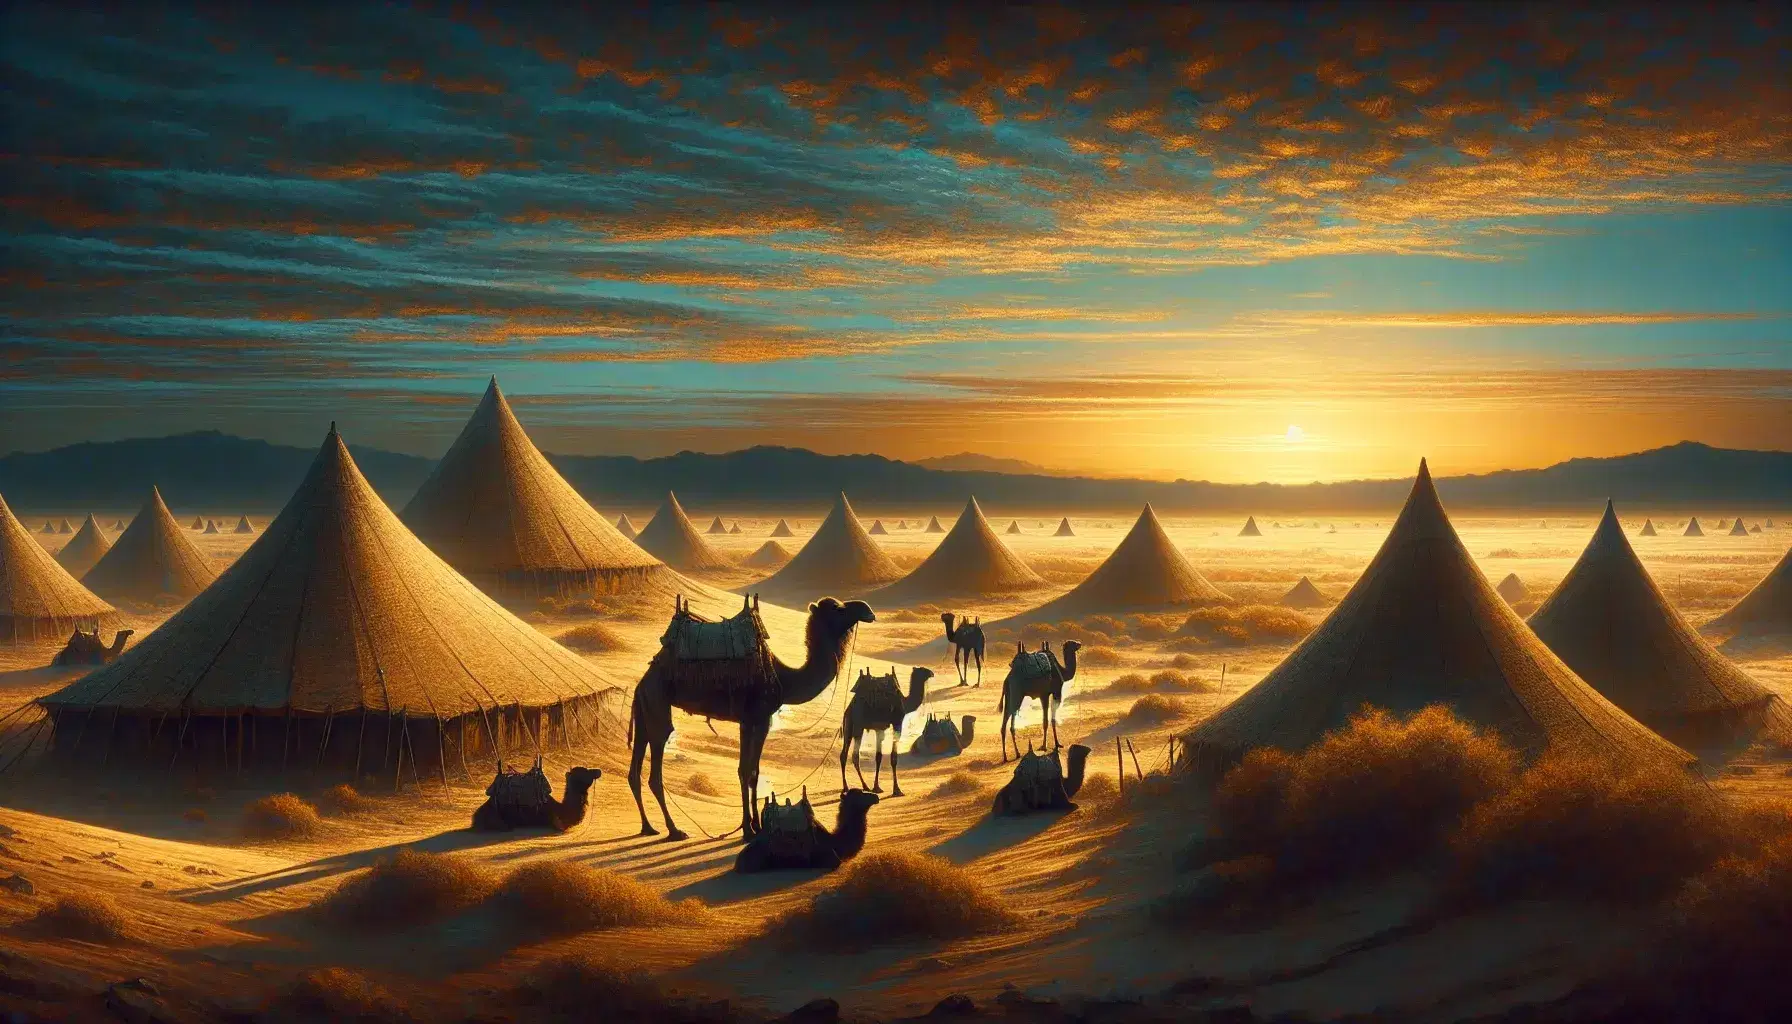 Dawn breaks over a serene desert landscape with silhouetted camels, traditional Bedouin tents, and men in cultural attire engaging in morning activities.